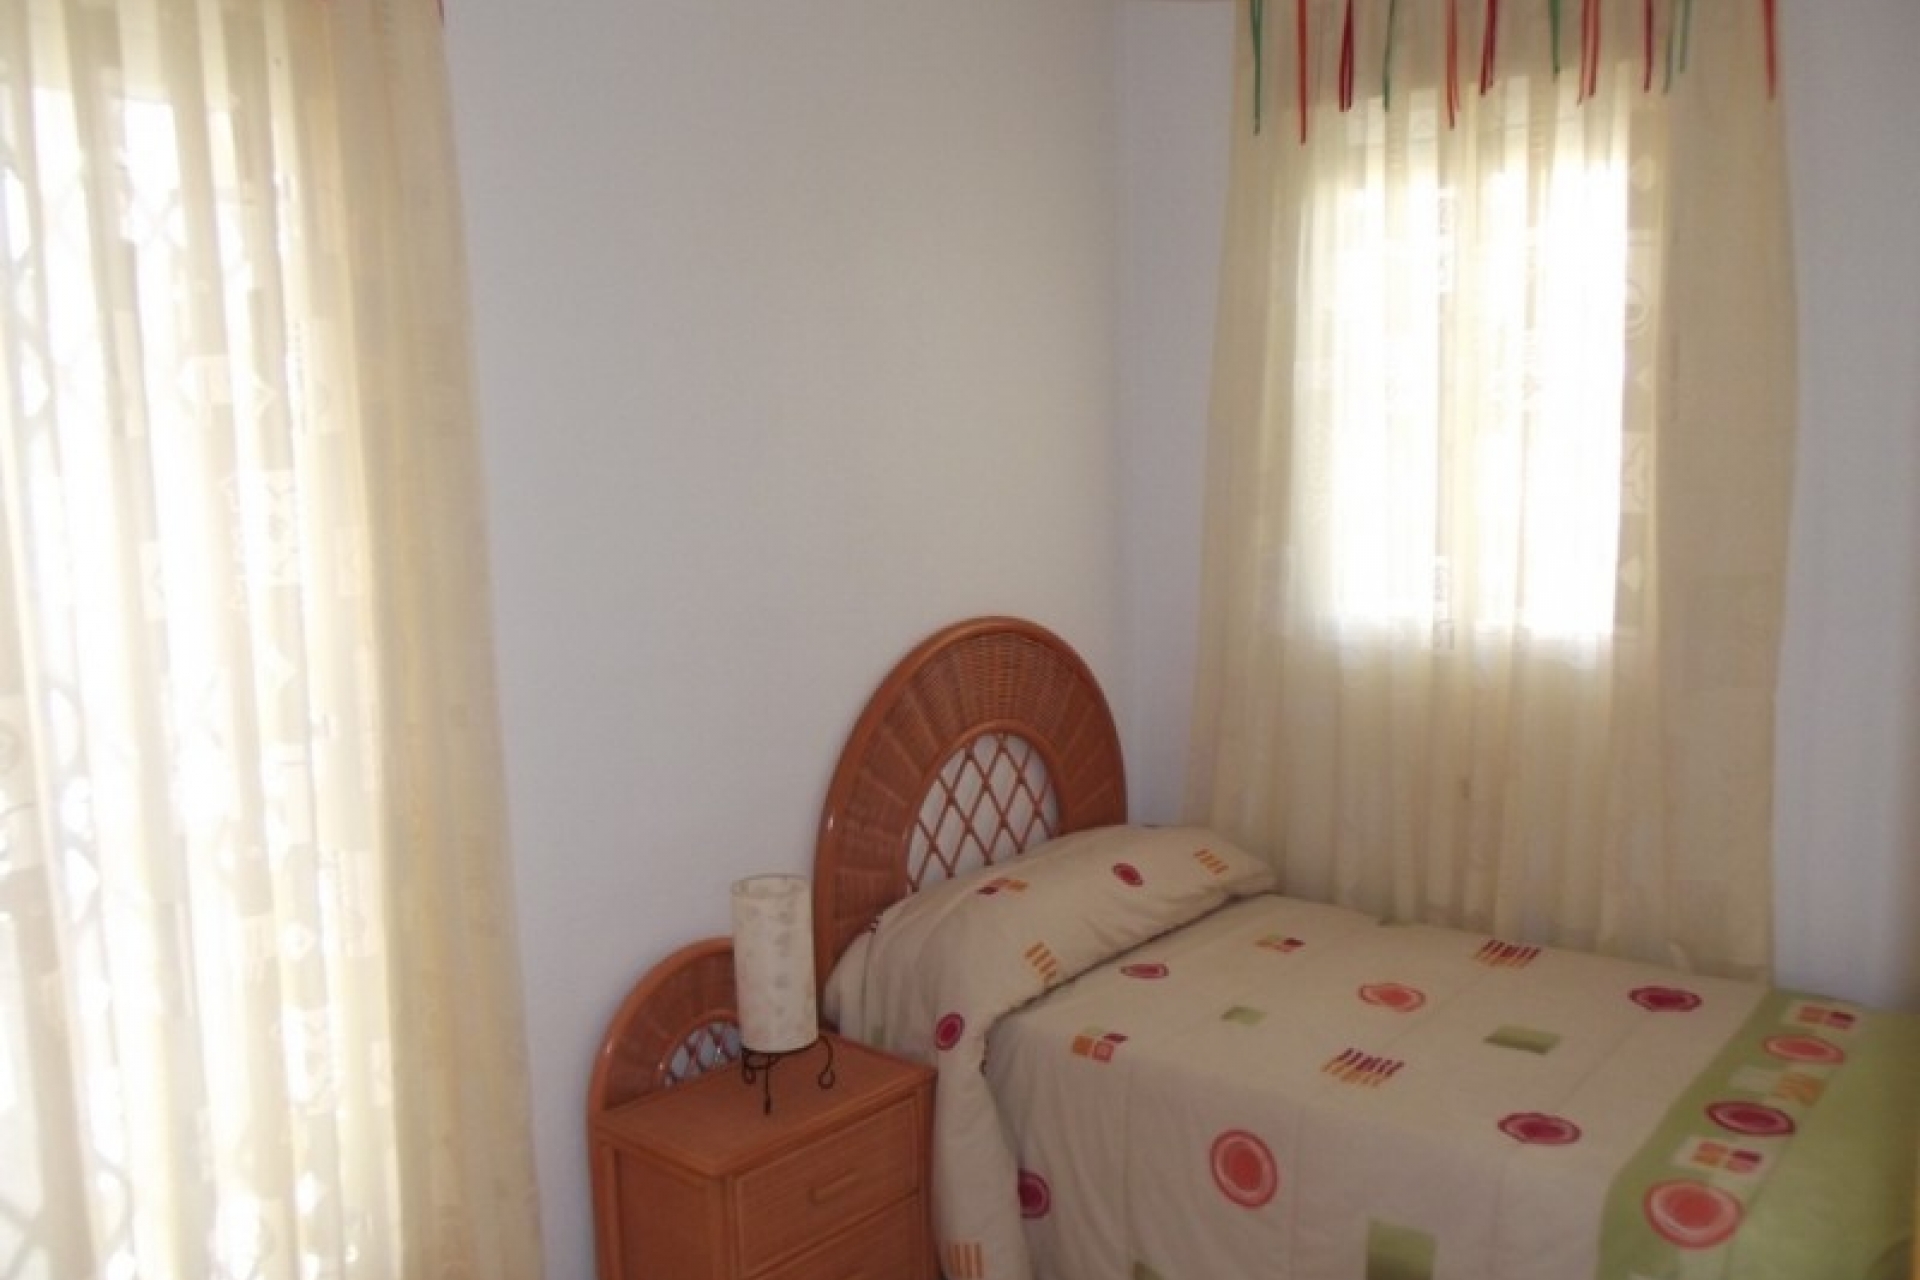 Cheap bargain property for sale Costa Blanca Spain